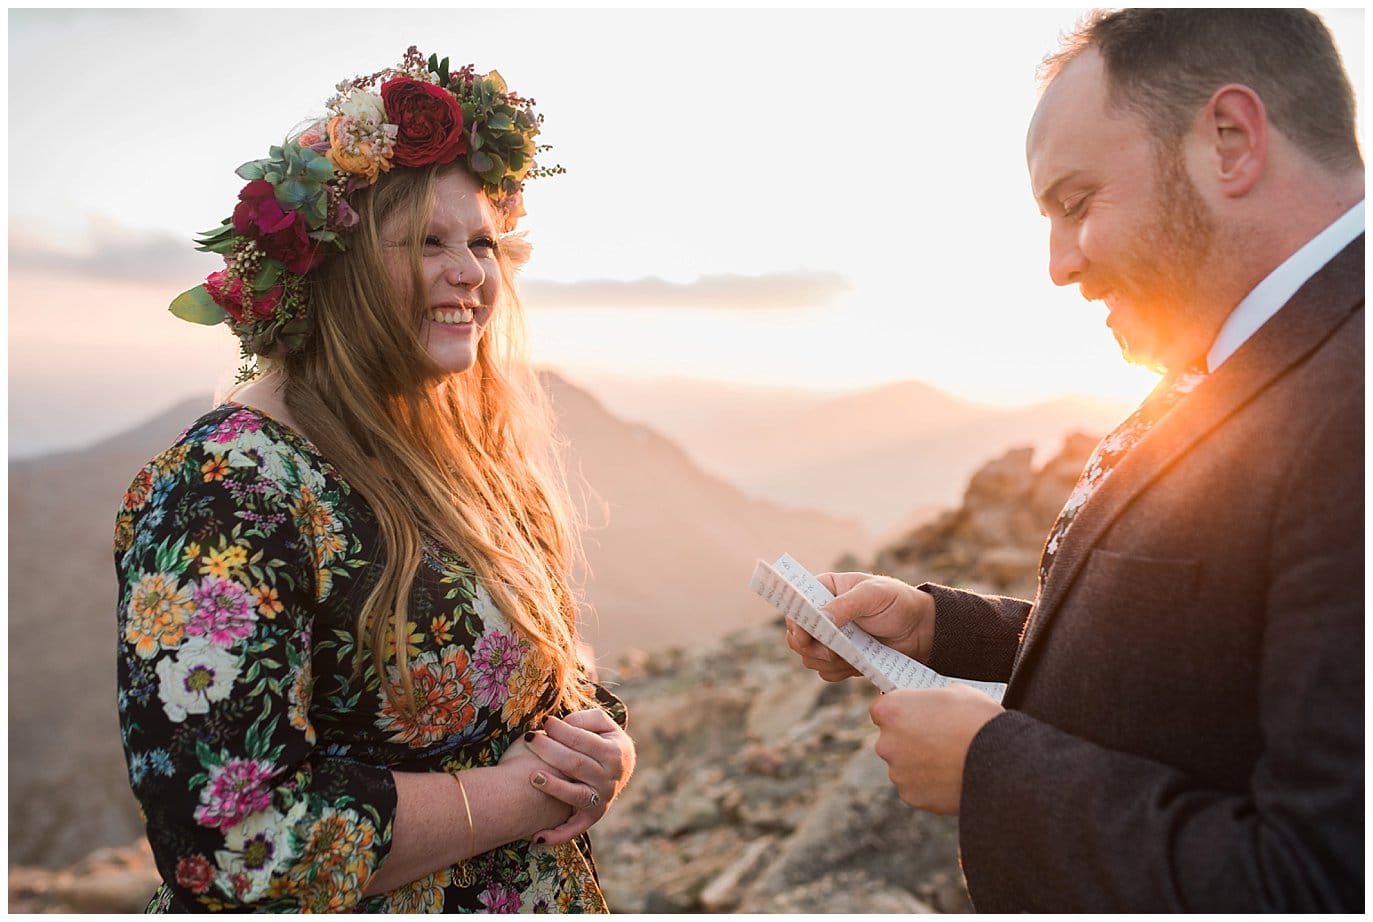 Emotional vows at the top of Mt. Evans elopement photo